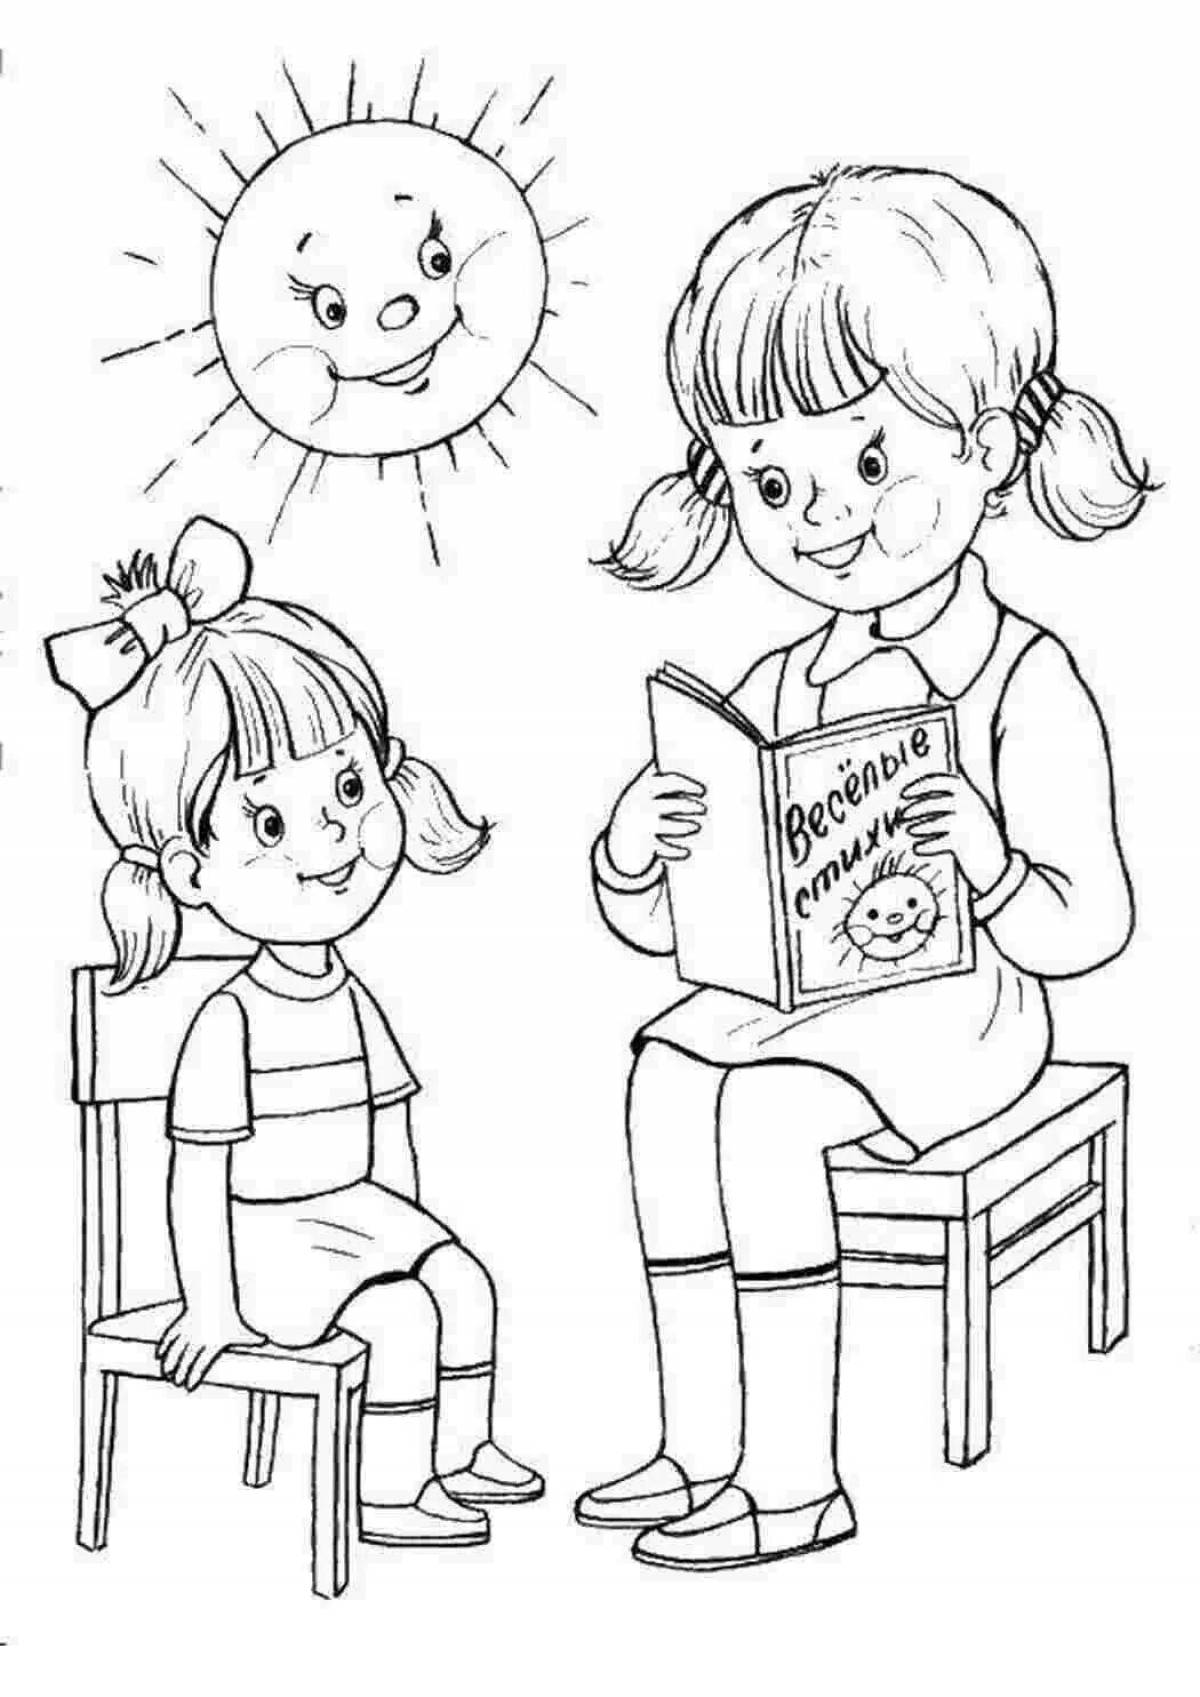 Kind bright coloring for children